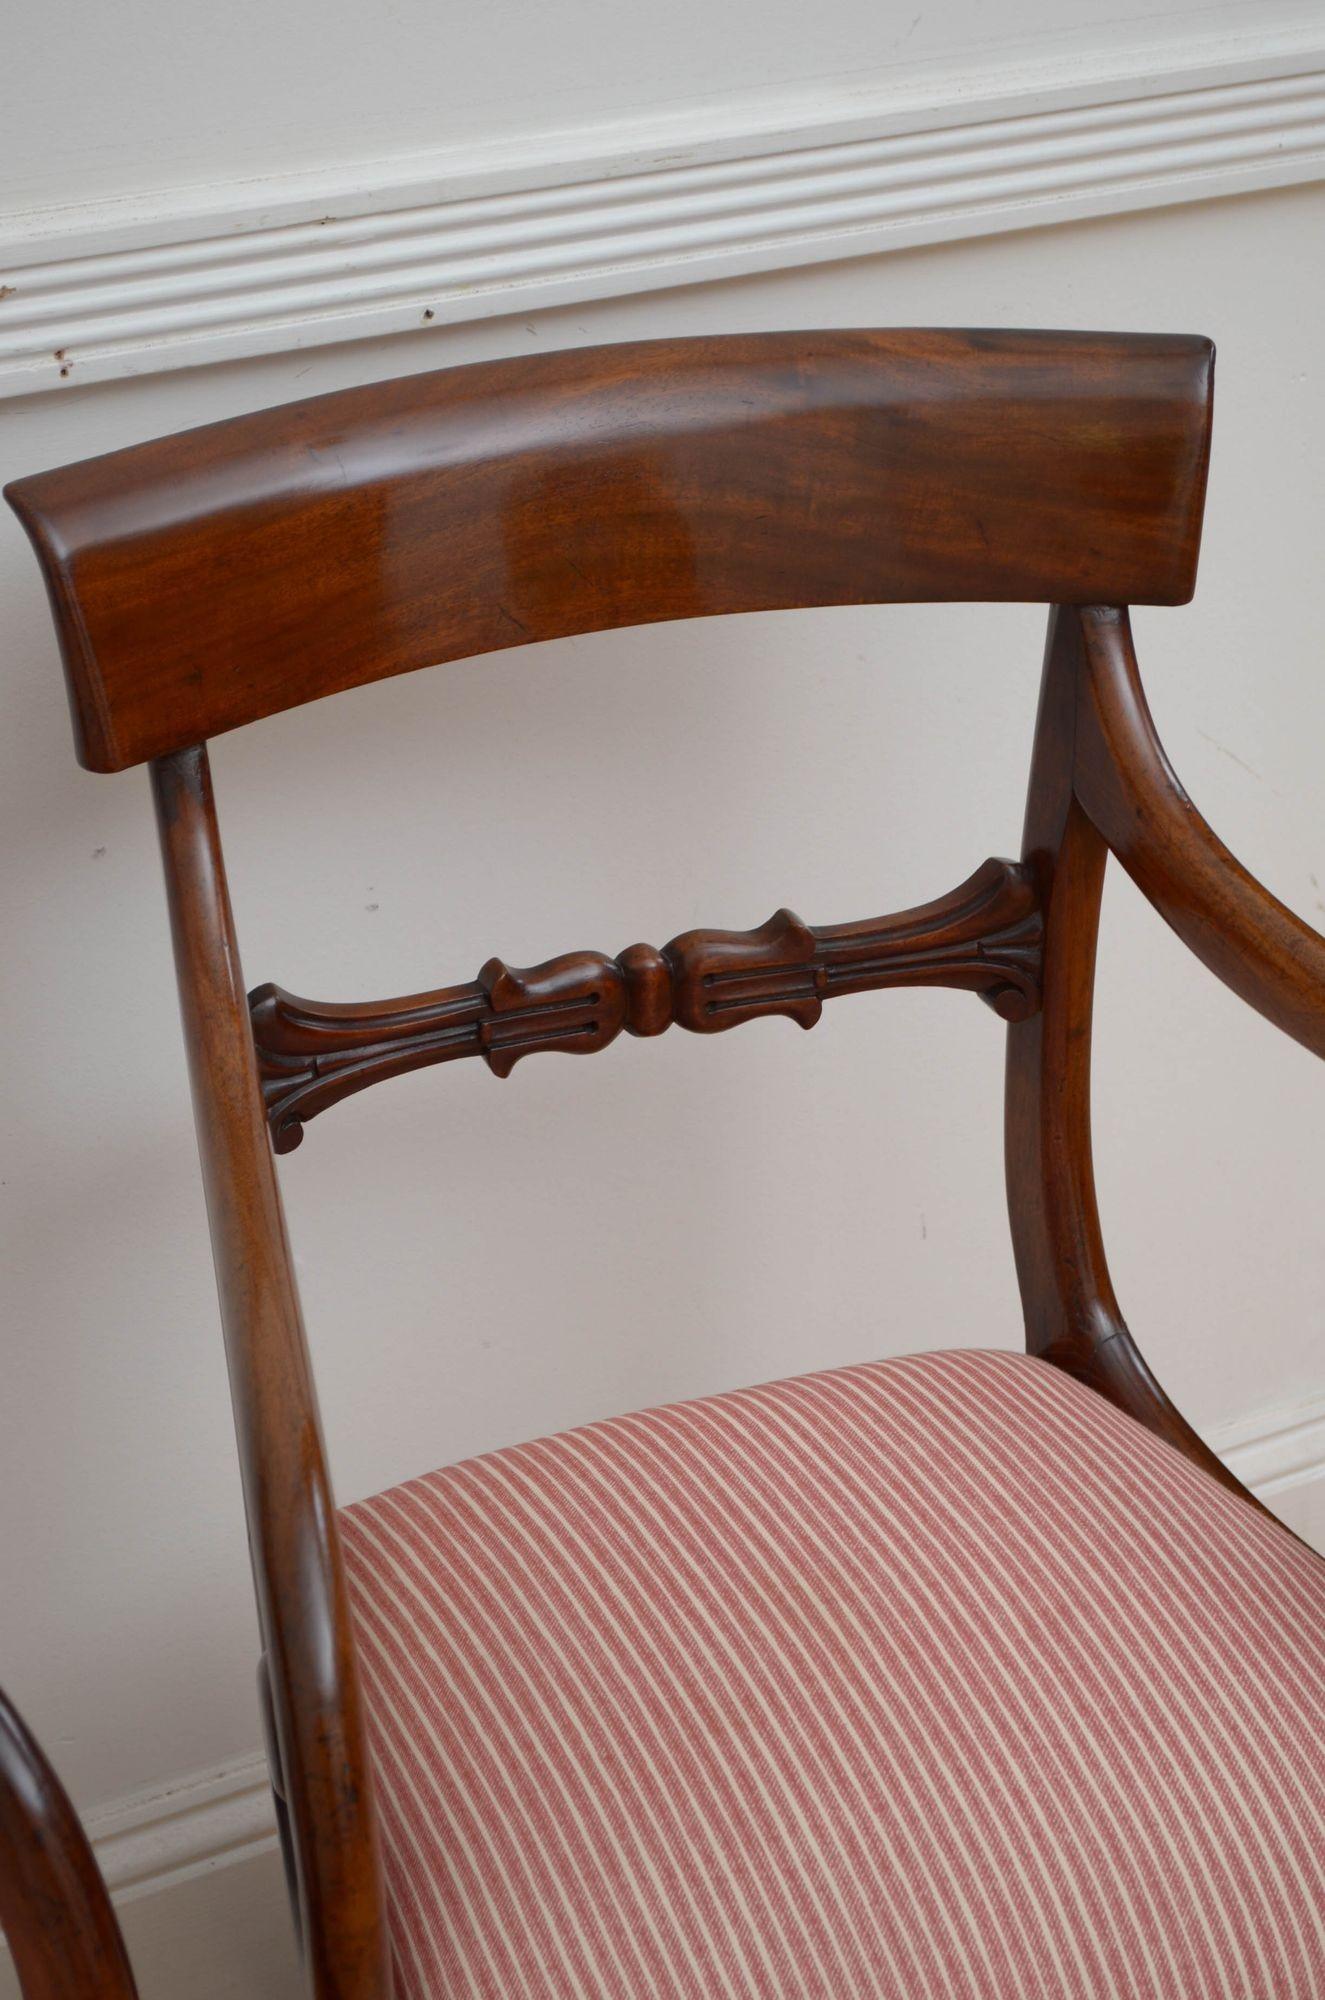 Pair of William IV Mahogany Carvers In Good Condition For Sale In Whaley Bridge, GB